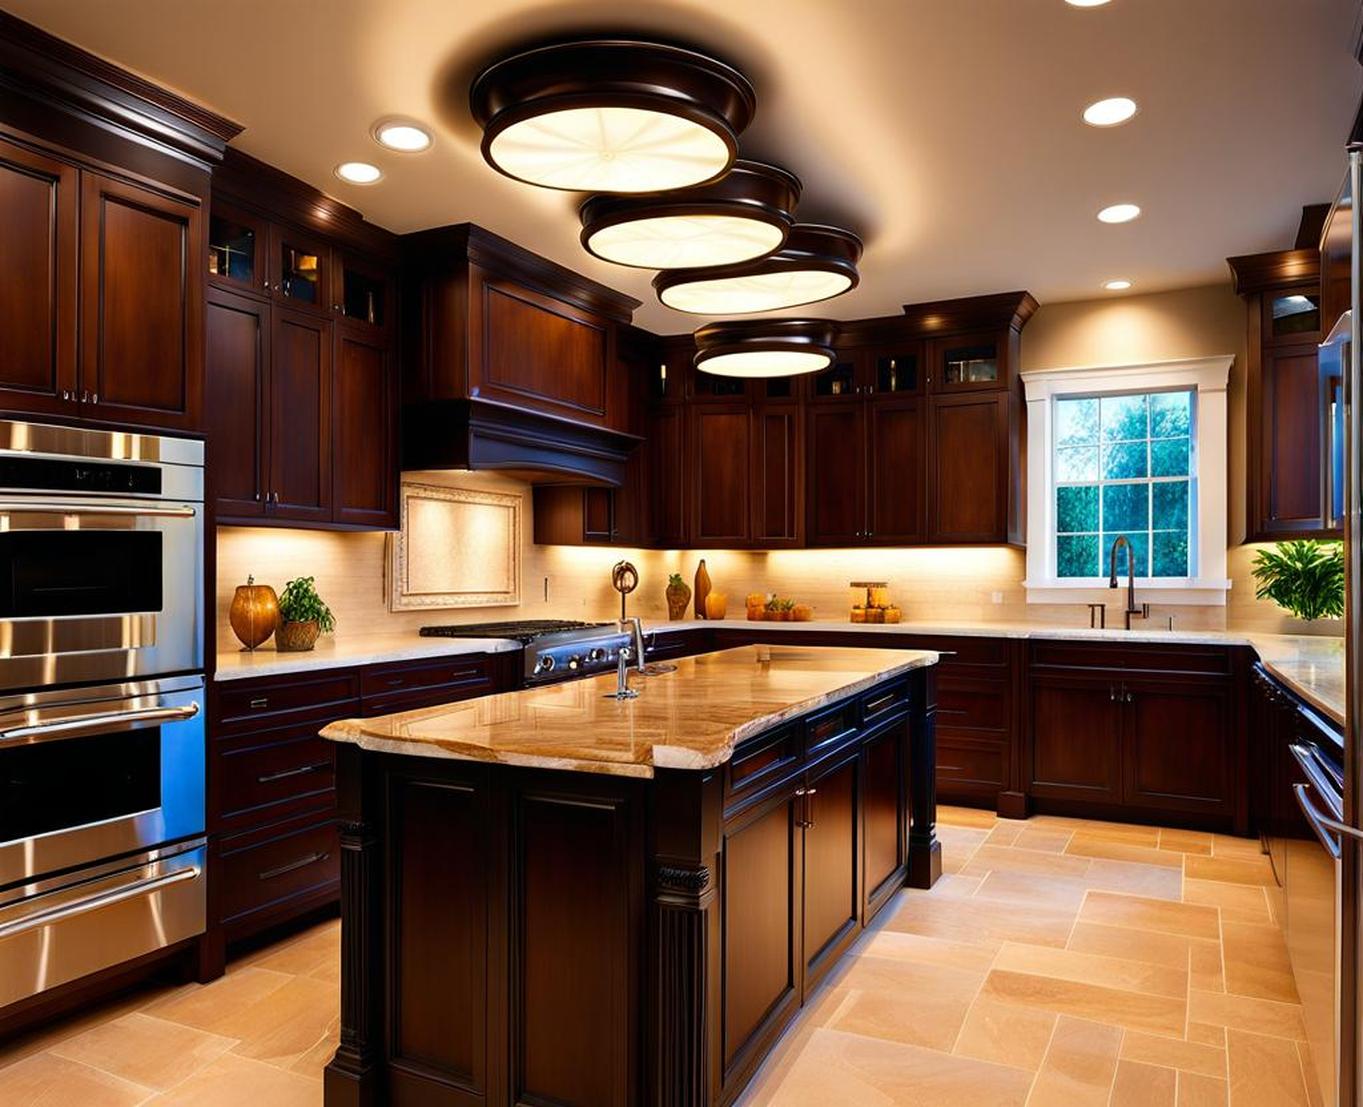 Get the Right Downlighting With Flush Mount Kitchen Lights